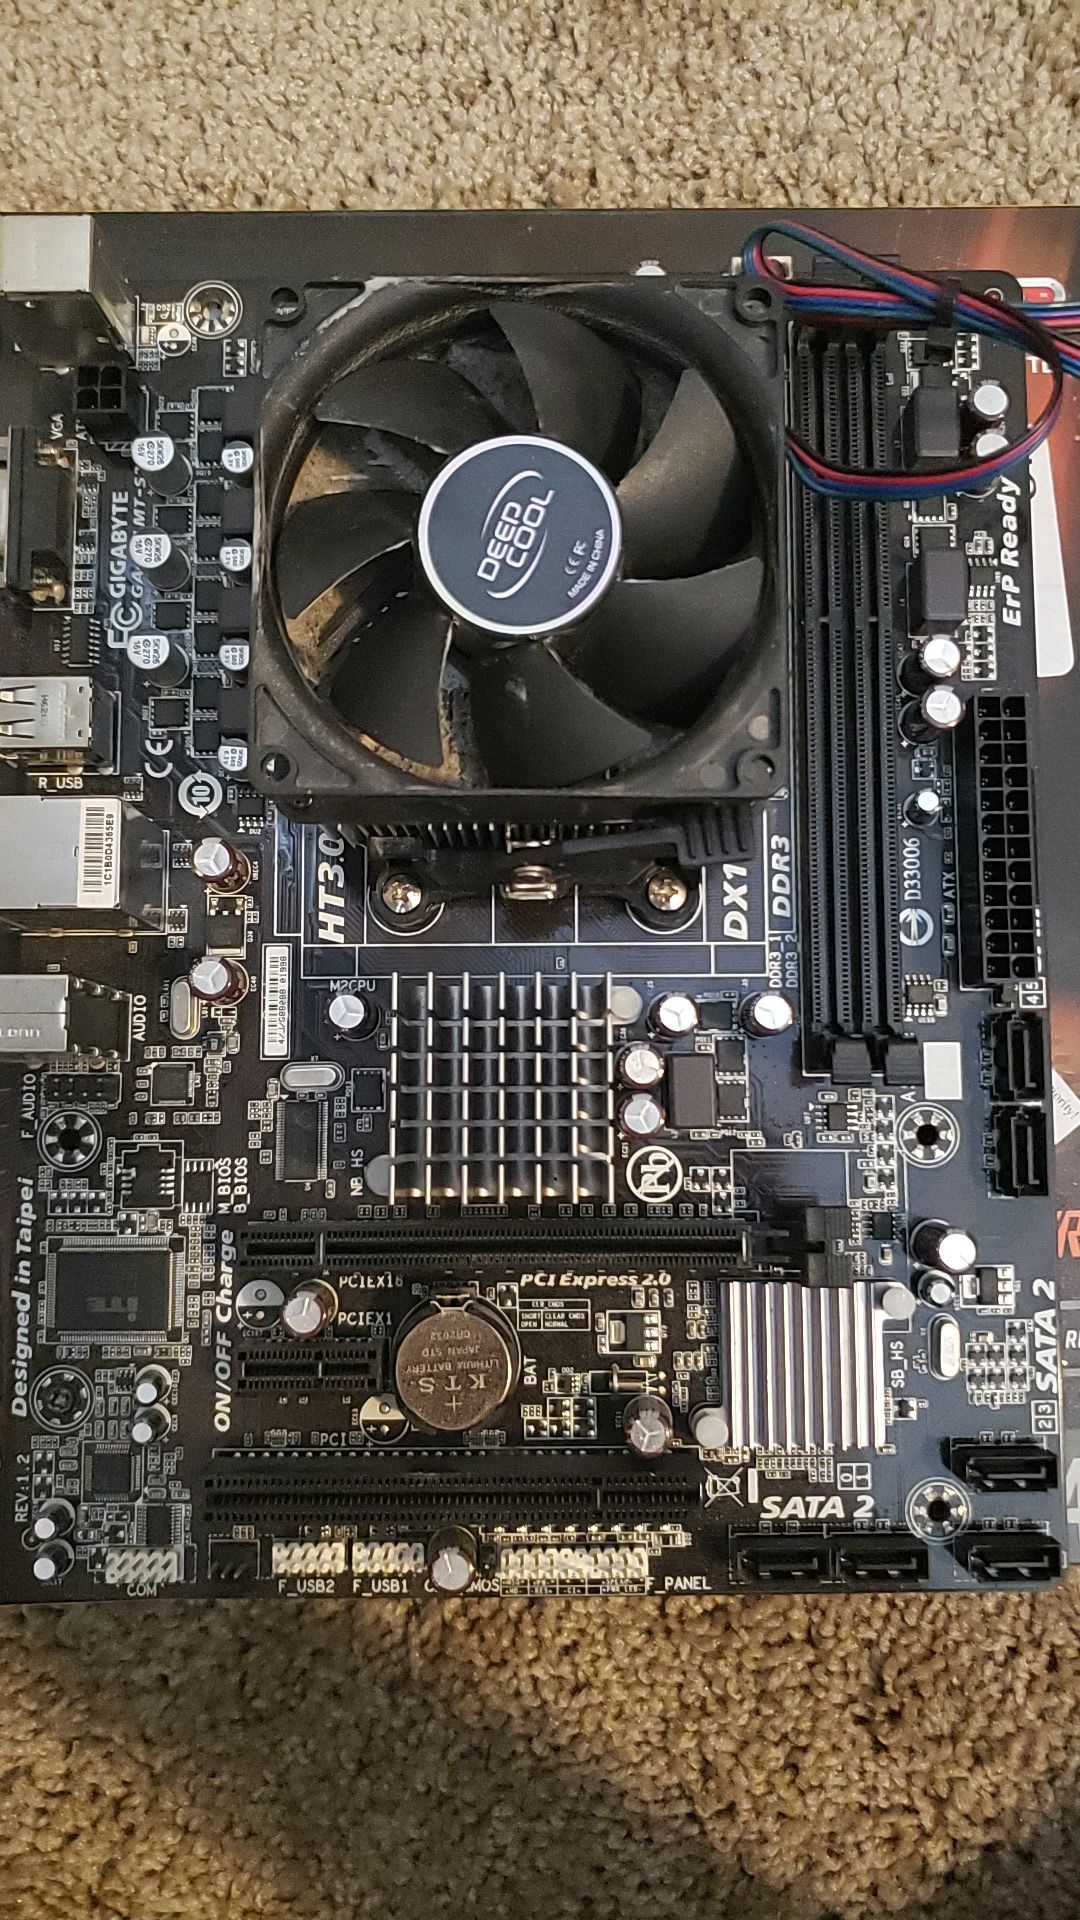 AMD FX-4300 Processor with motherboard and 16gb RAM